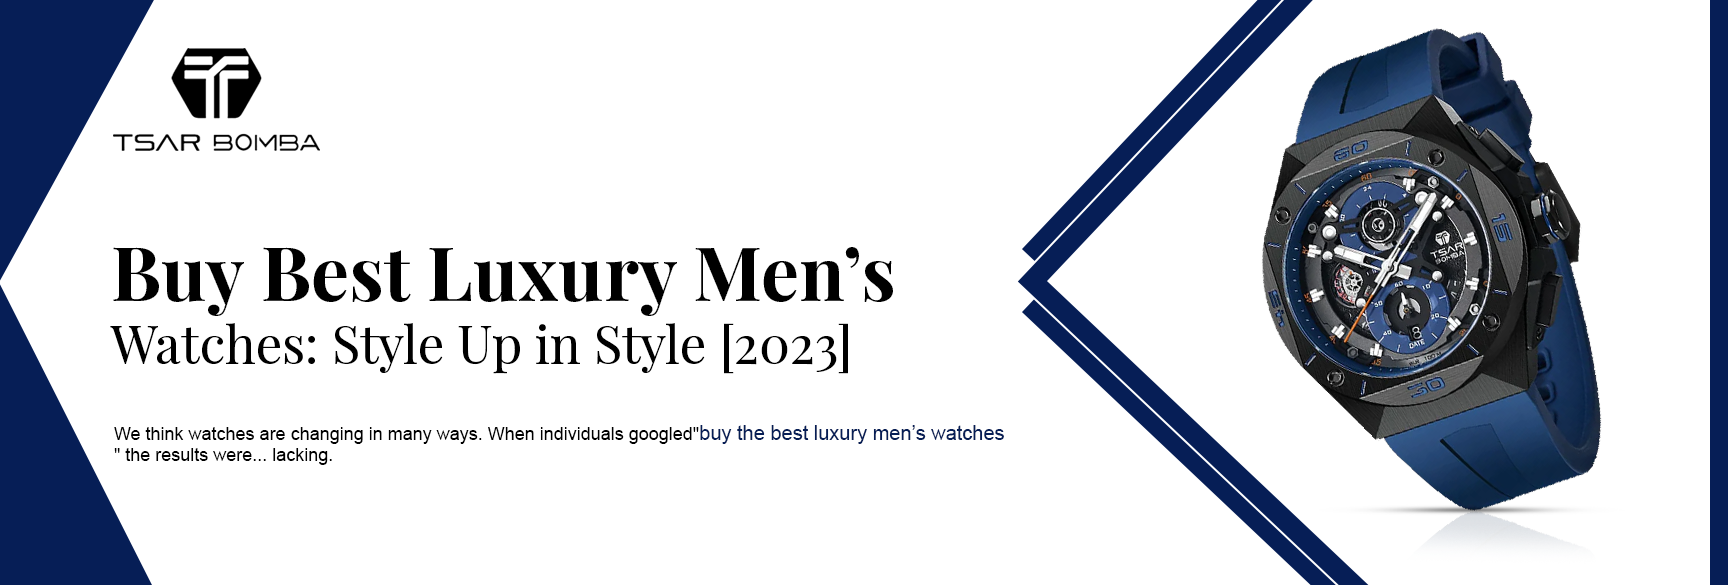 Buy Best Luxury Men’s Watches: Style Up in Style [2023]